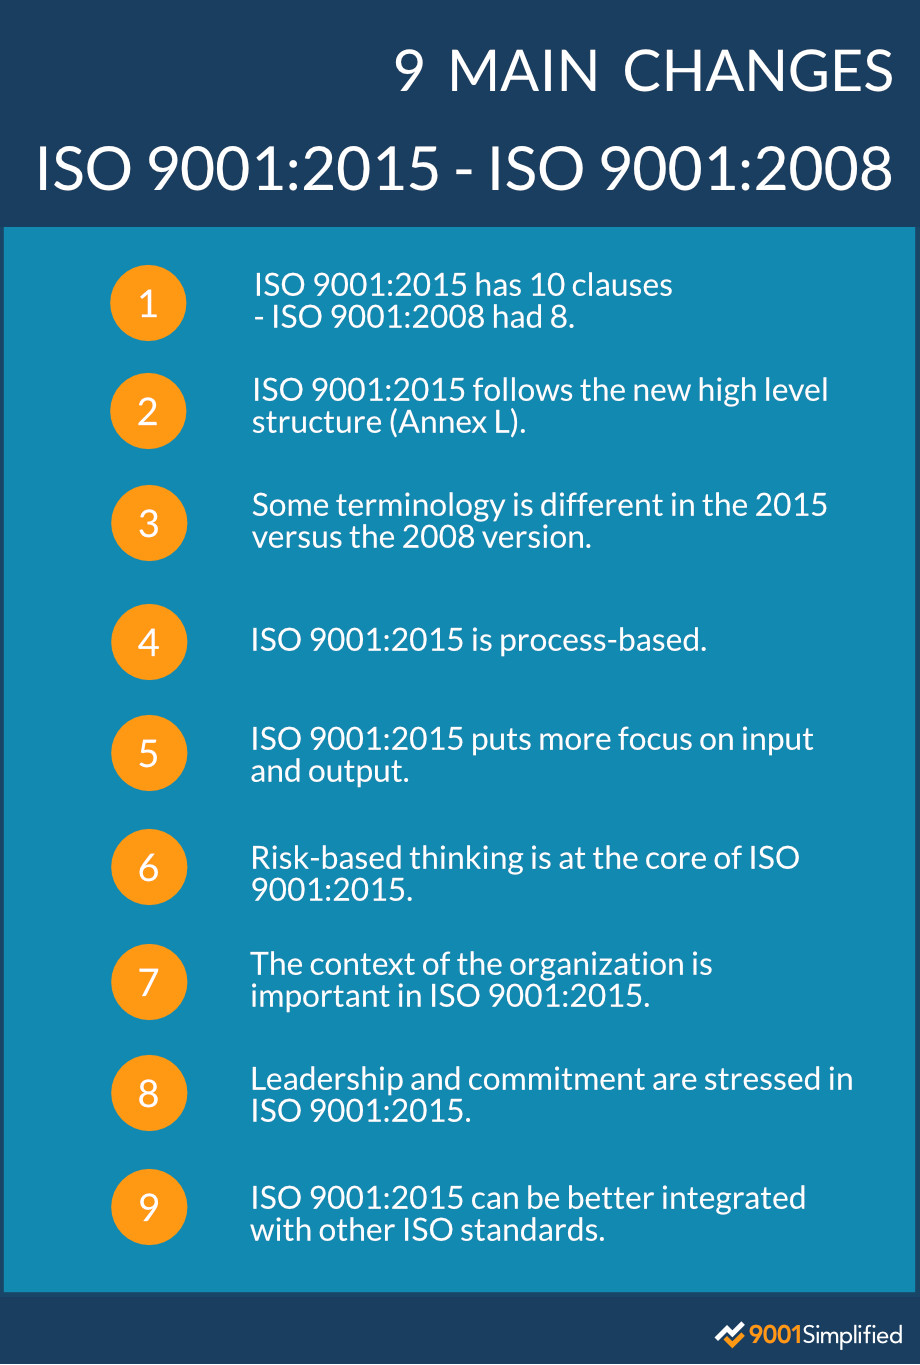 9 Ways ISO 9001:2015 Is Different From ISO 9001:2008